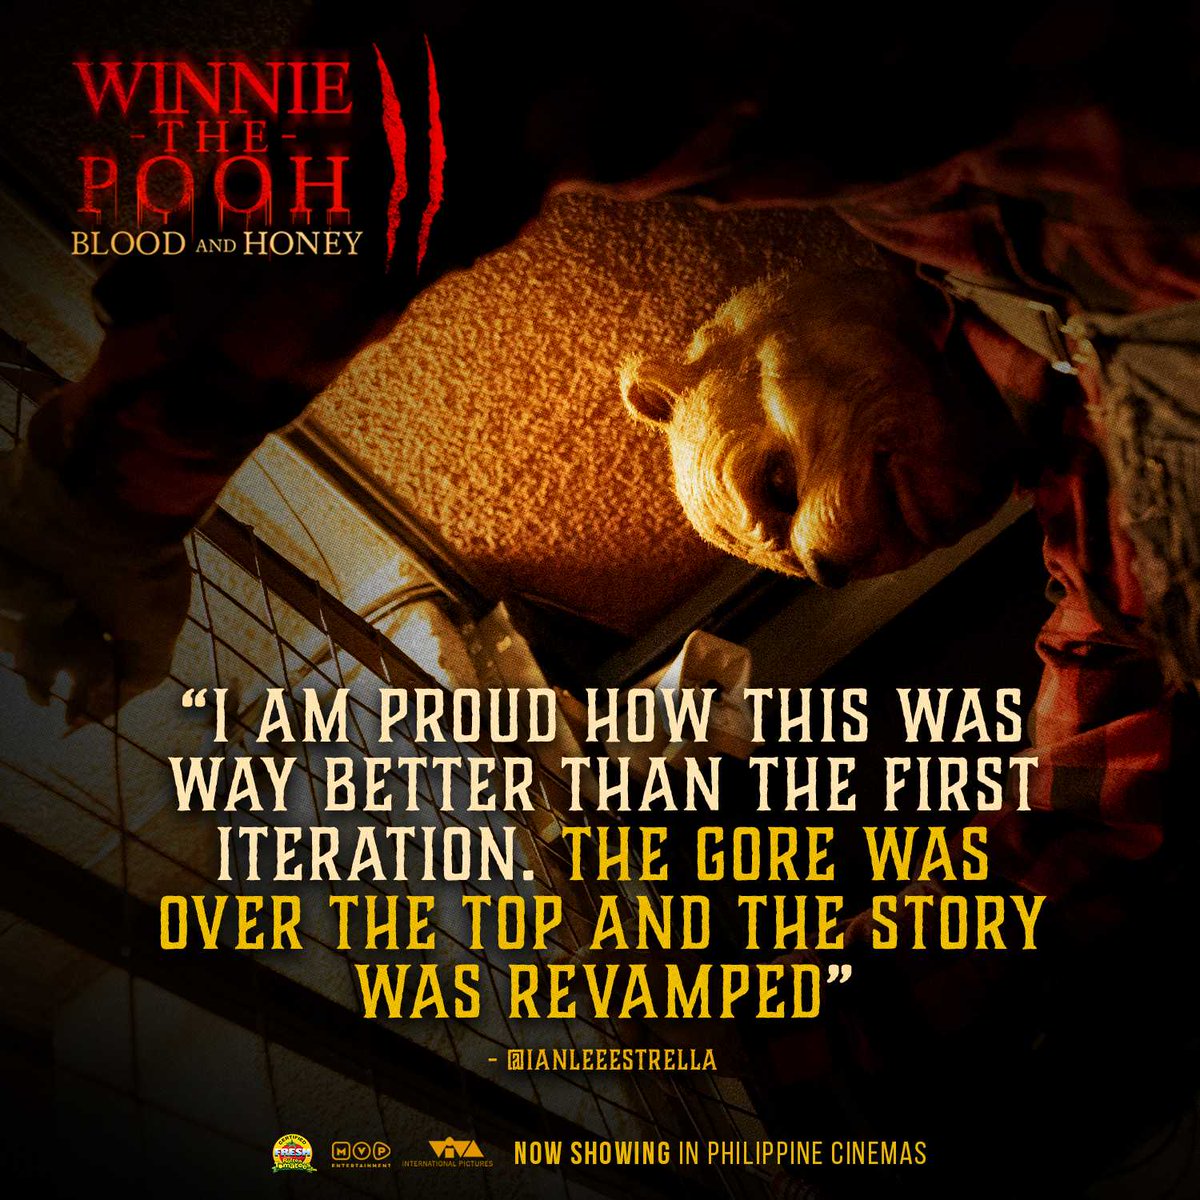 WINNIE's back SCARIER, BLOODIER, and FAR MORE BRUTAL! Catch 'WINNIE THE POOH: BLOOD and HONEY 2', NOW SHOWING In Philippine Cinemas! #WinnieThePooh2 #Blood&Honey2